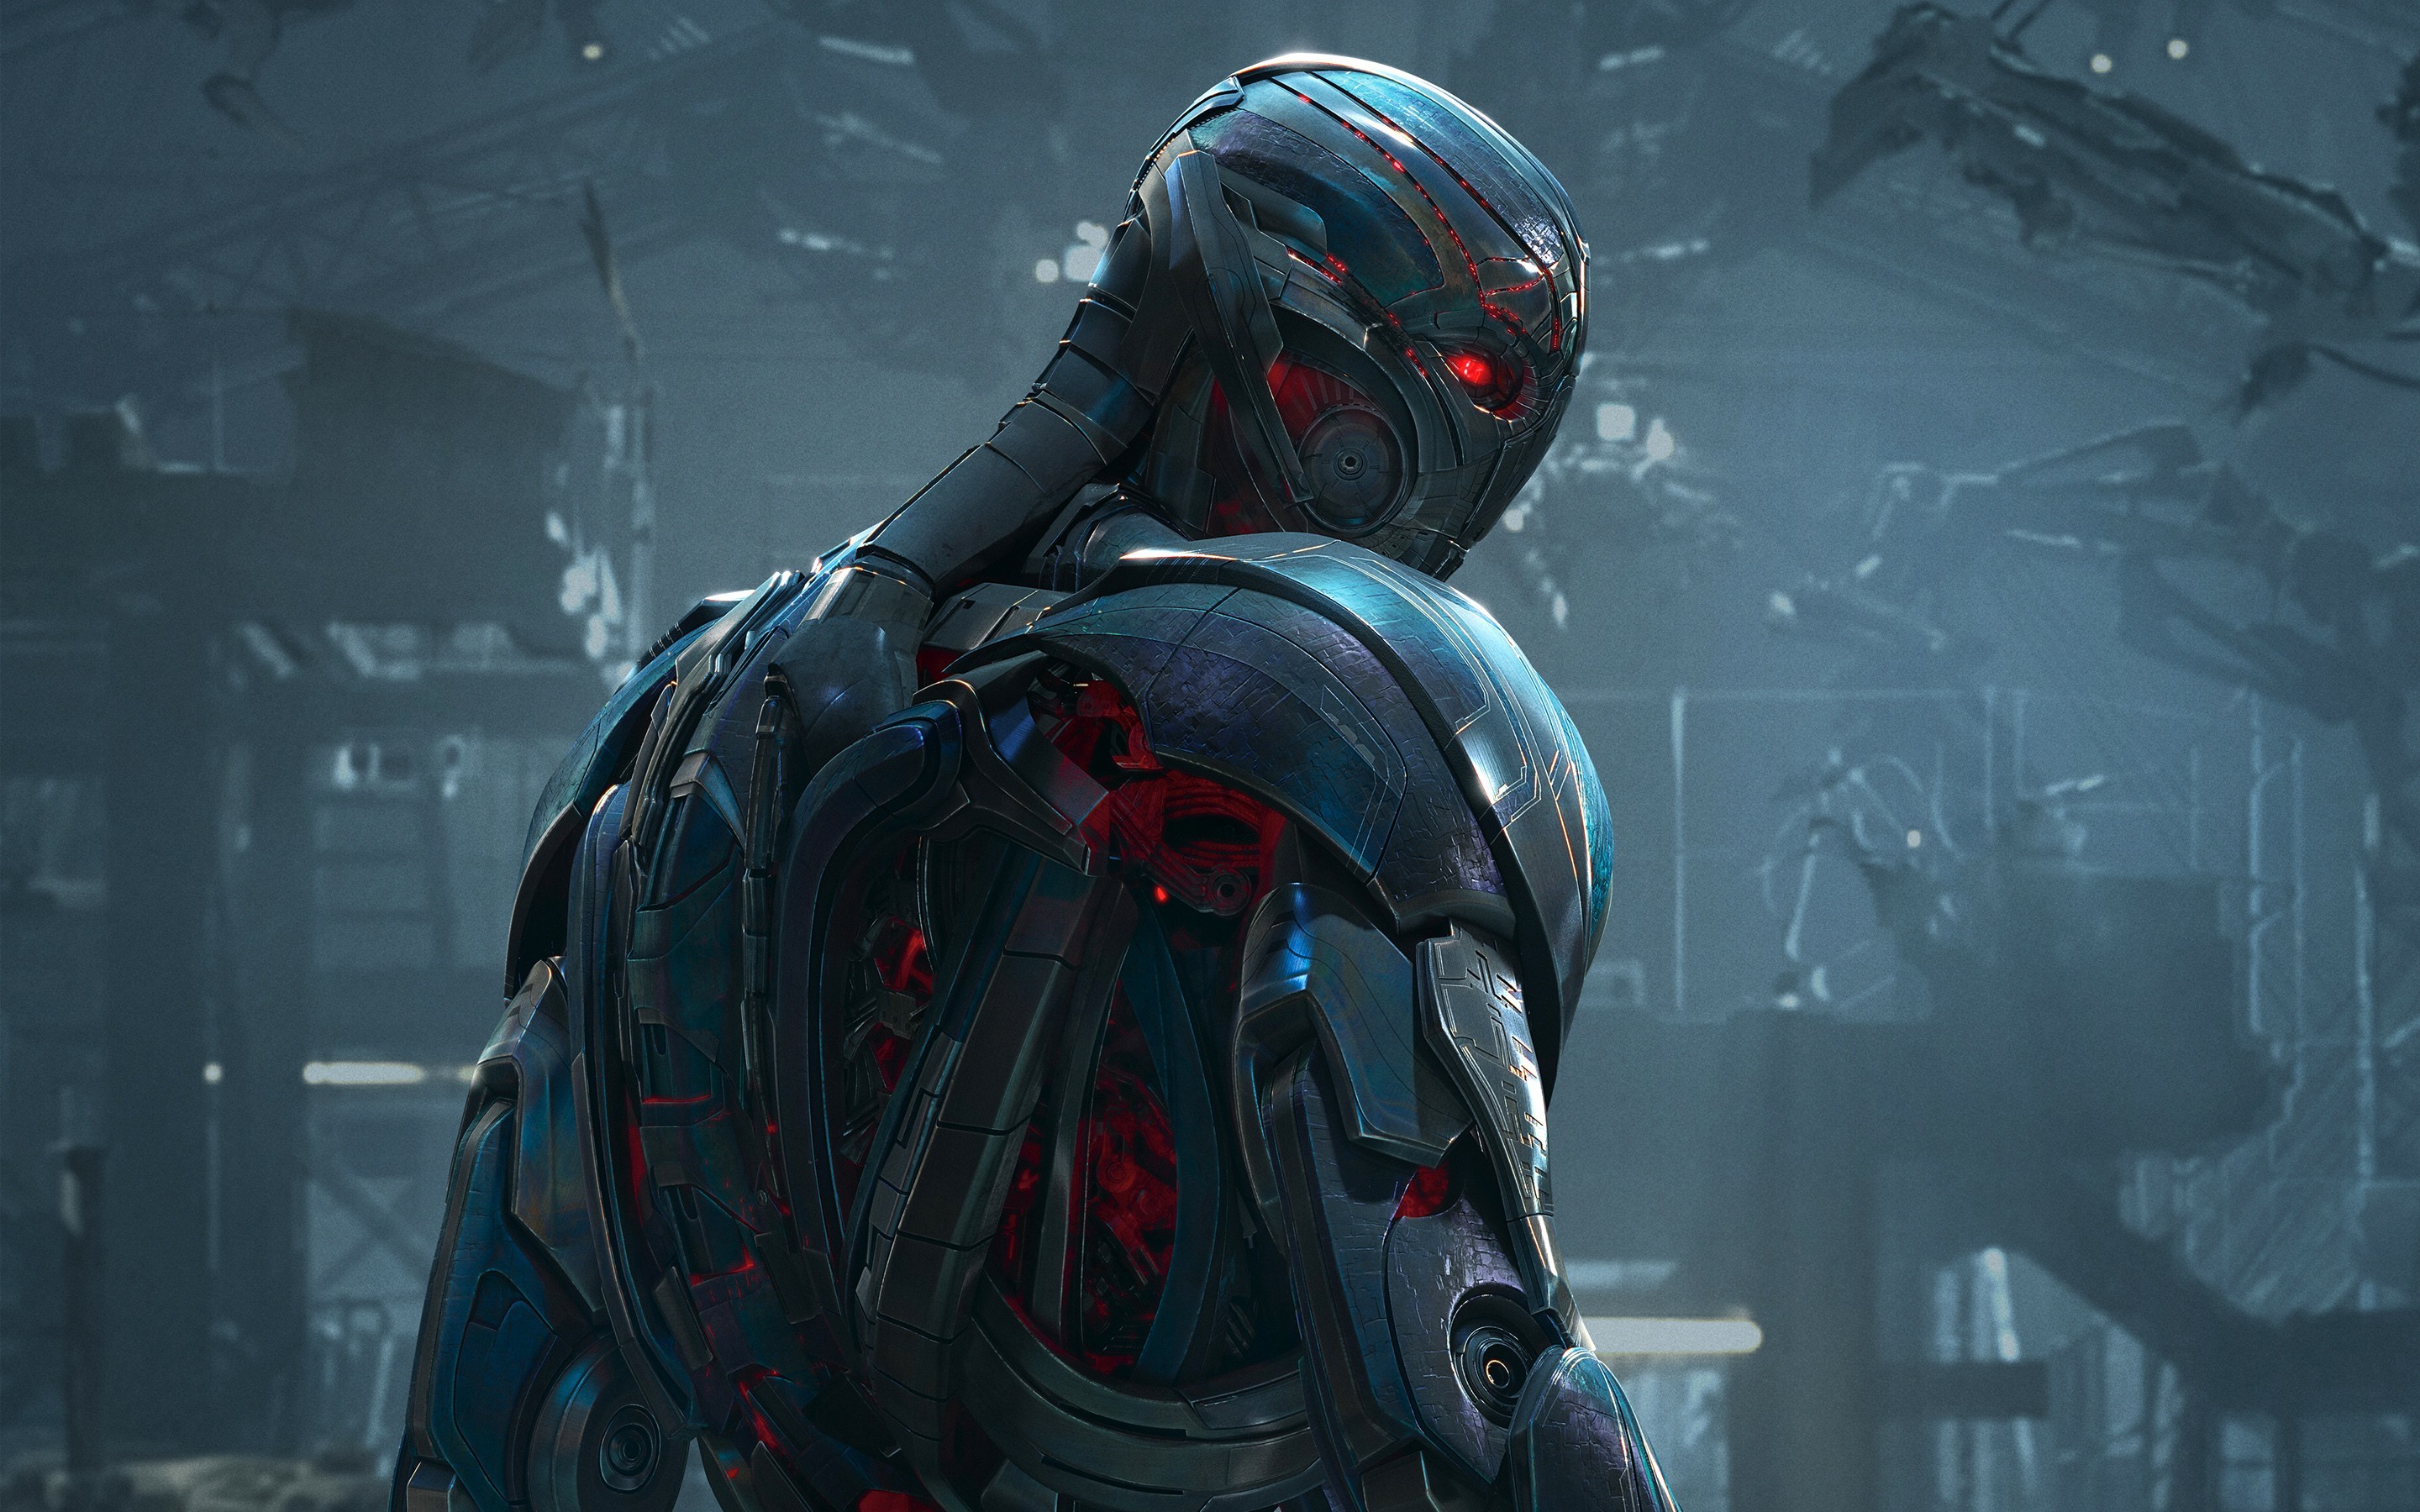 Avengers Age of Ultron Wallpapers (67+ images)